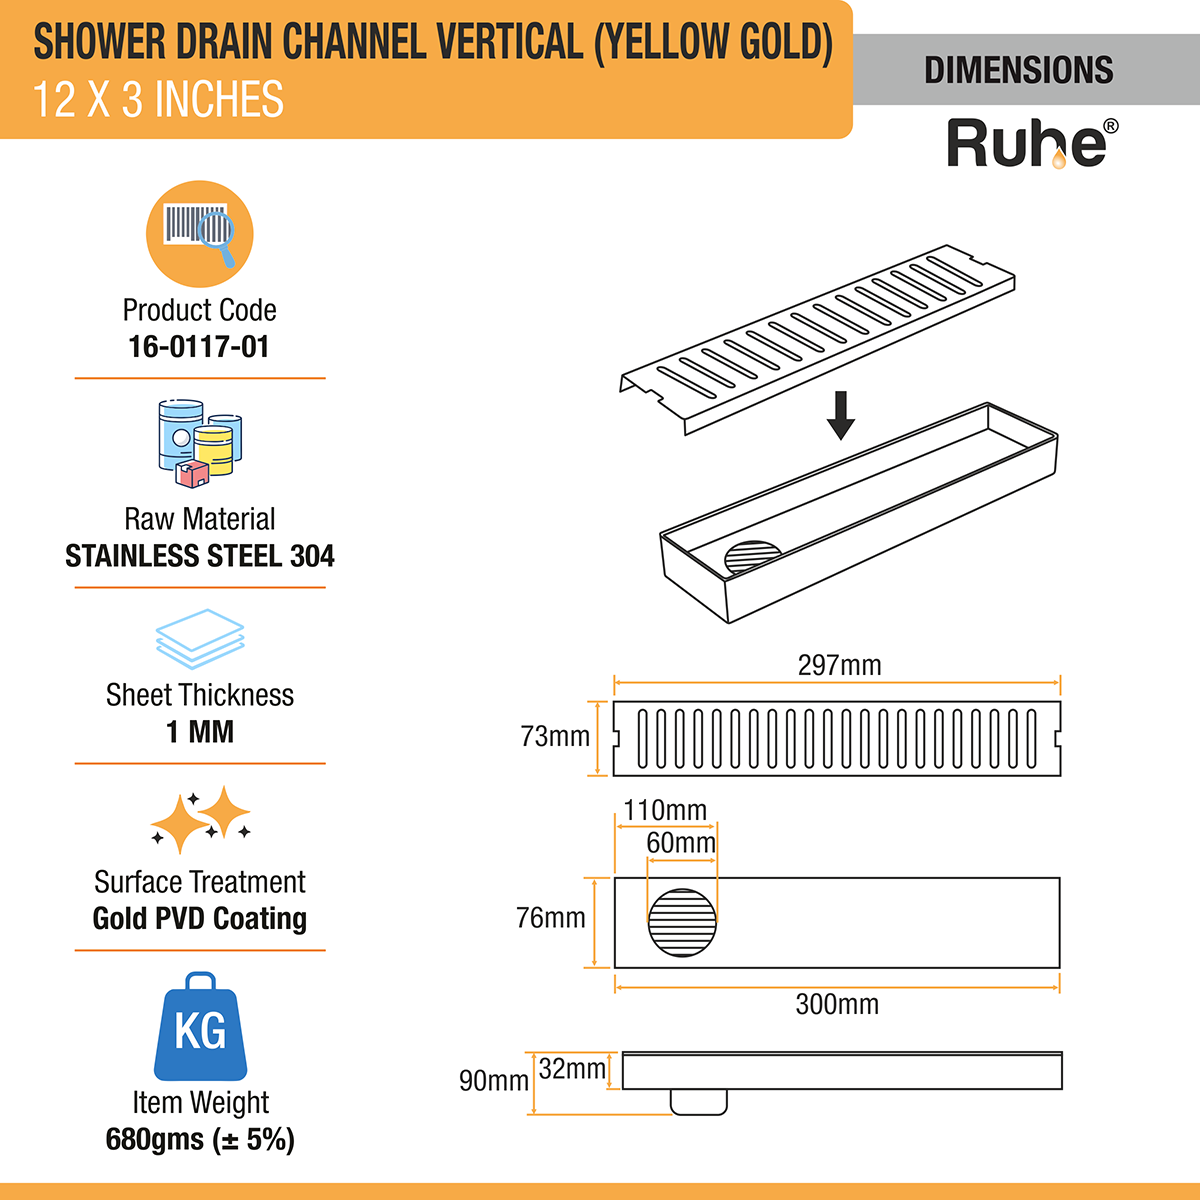 Vertical Shower Drain Channel (12 x 3 Inches) YELLOW GOLD dimensions and size